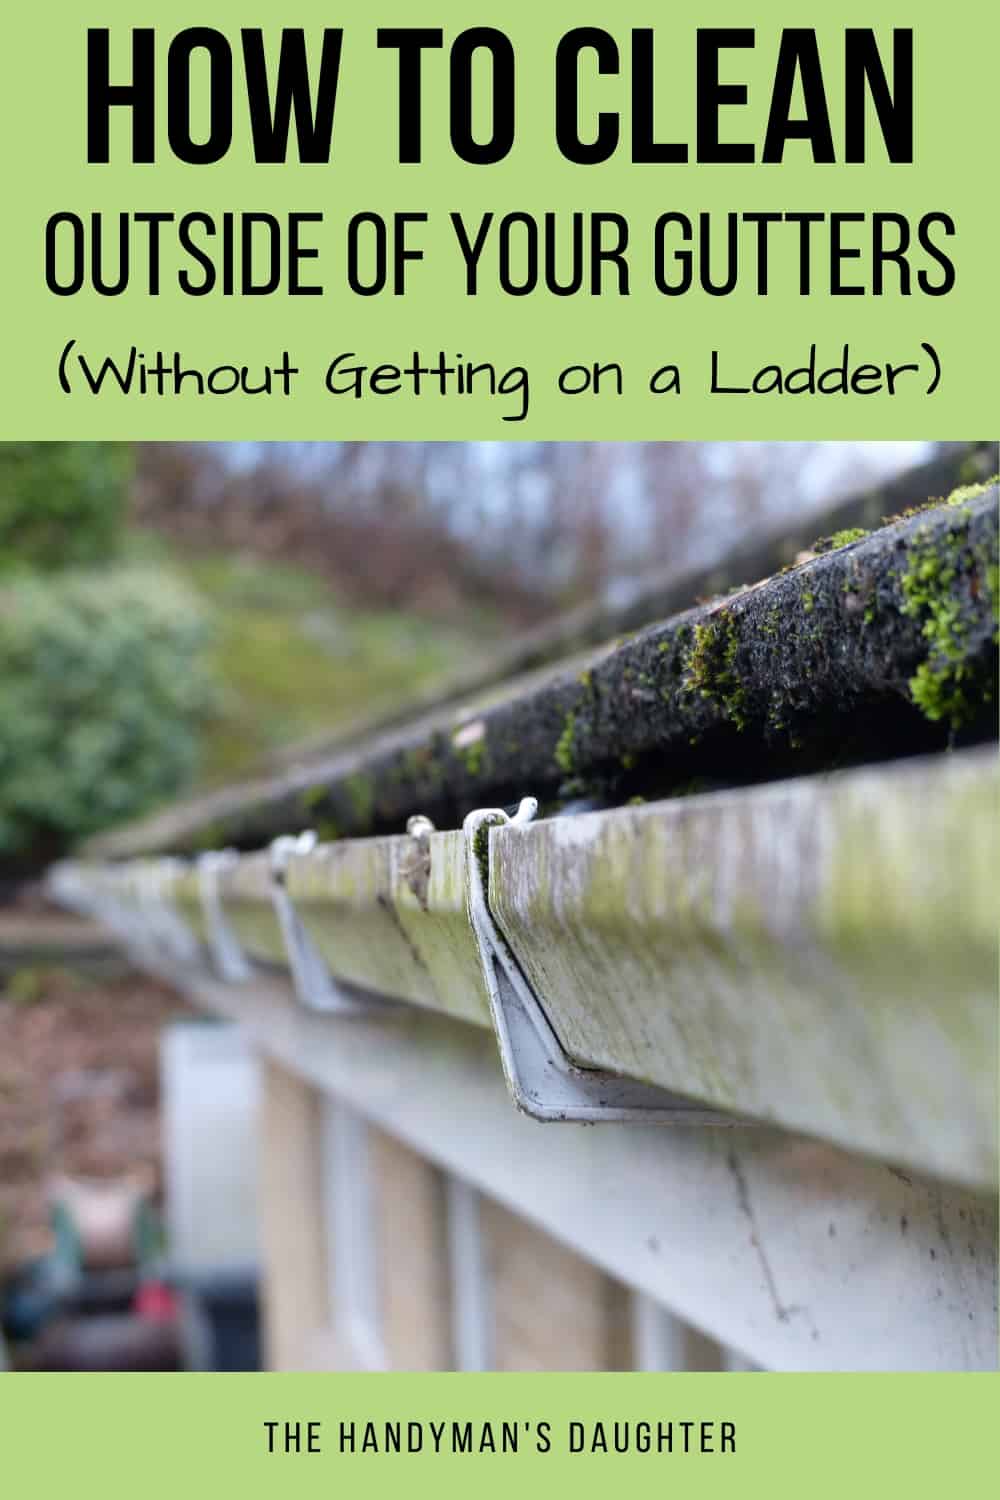 How to clean outside of gutters